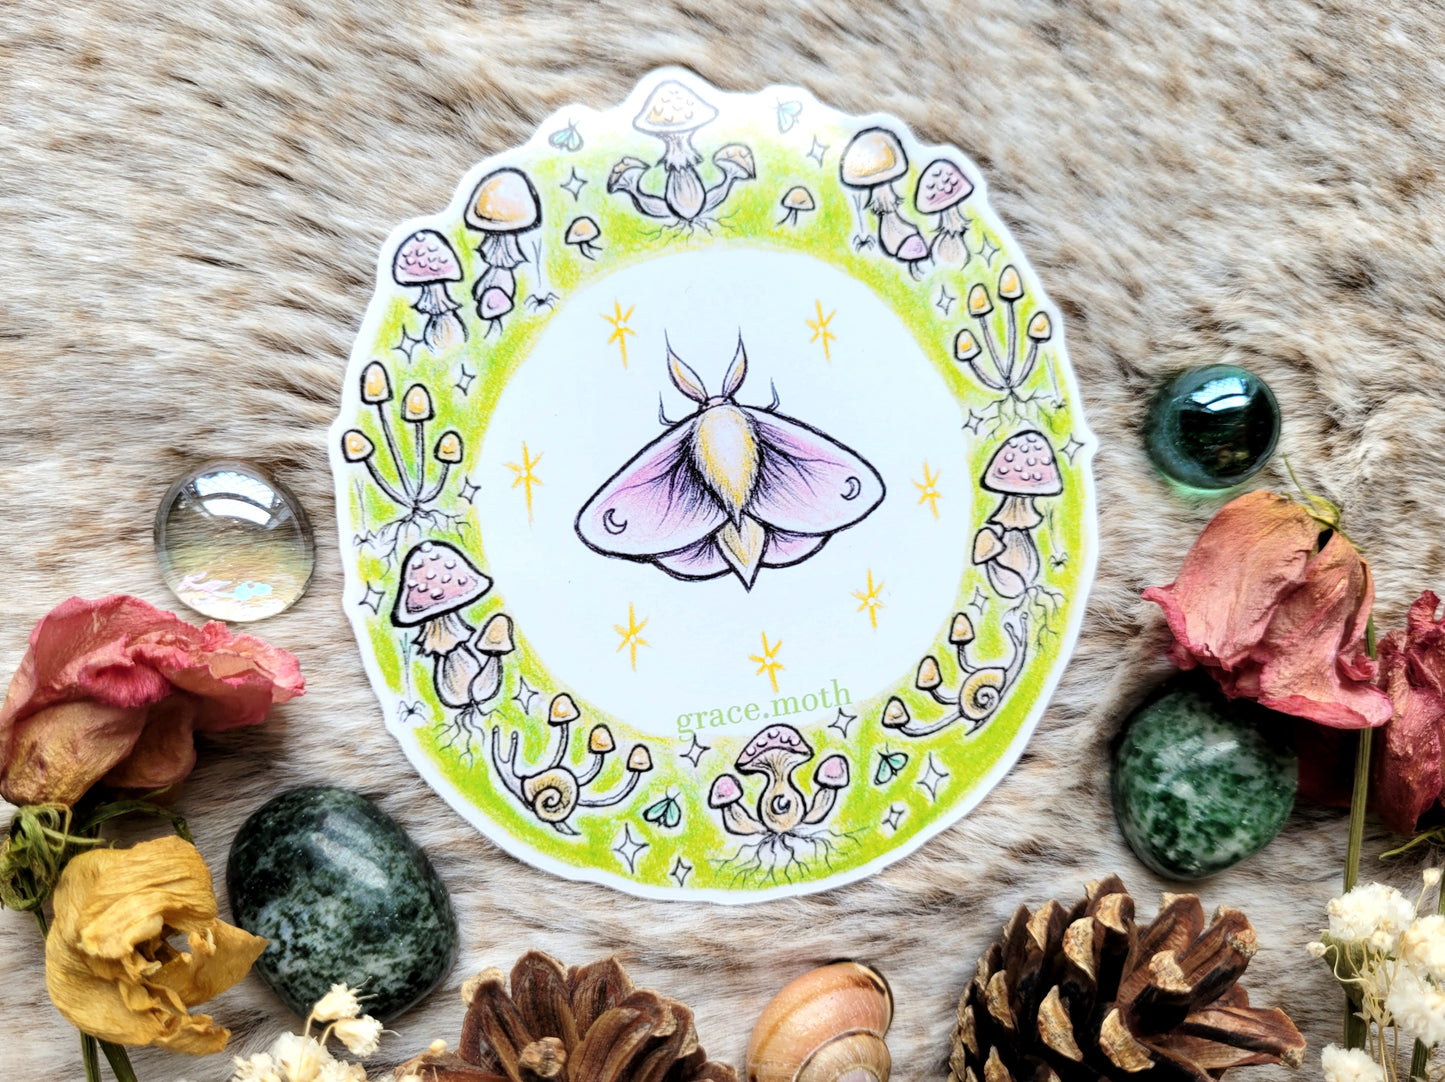 Pixie Ring - Vinyl Sticker 10cm - Fairy mushroom moth - Cottagecore - Witchy - Gothic - Illustrated by Grace moth